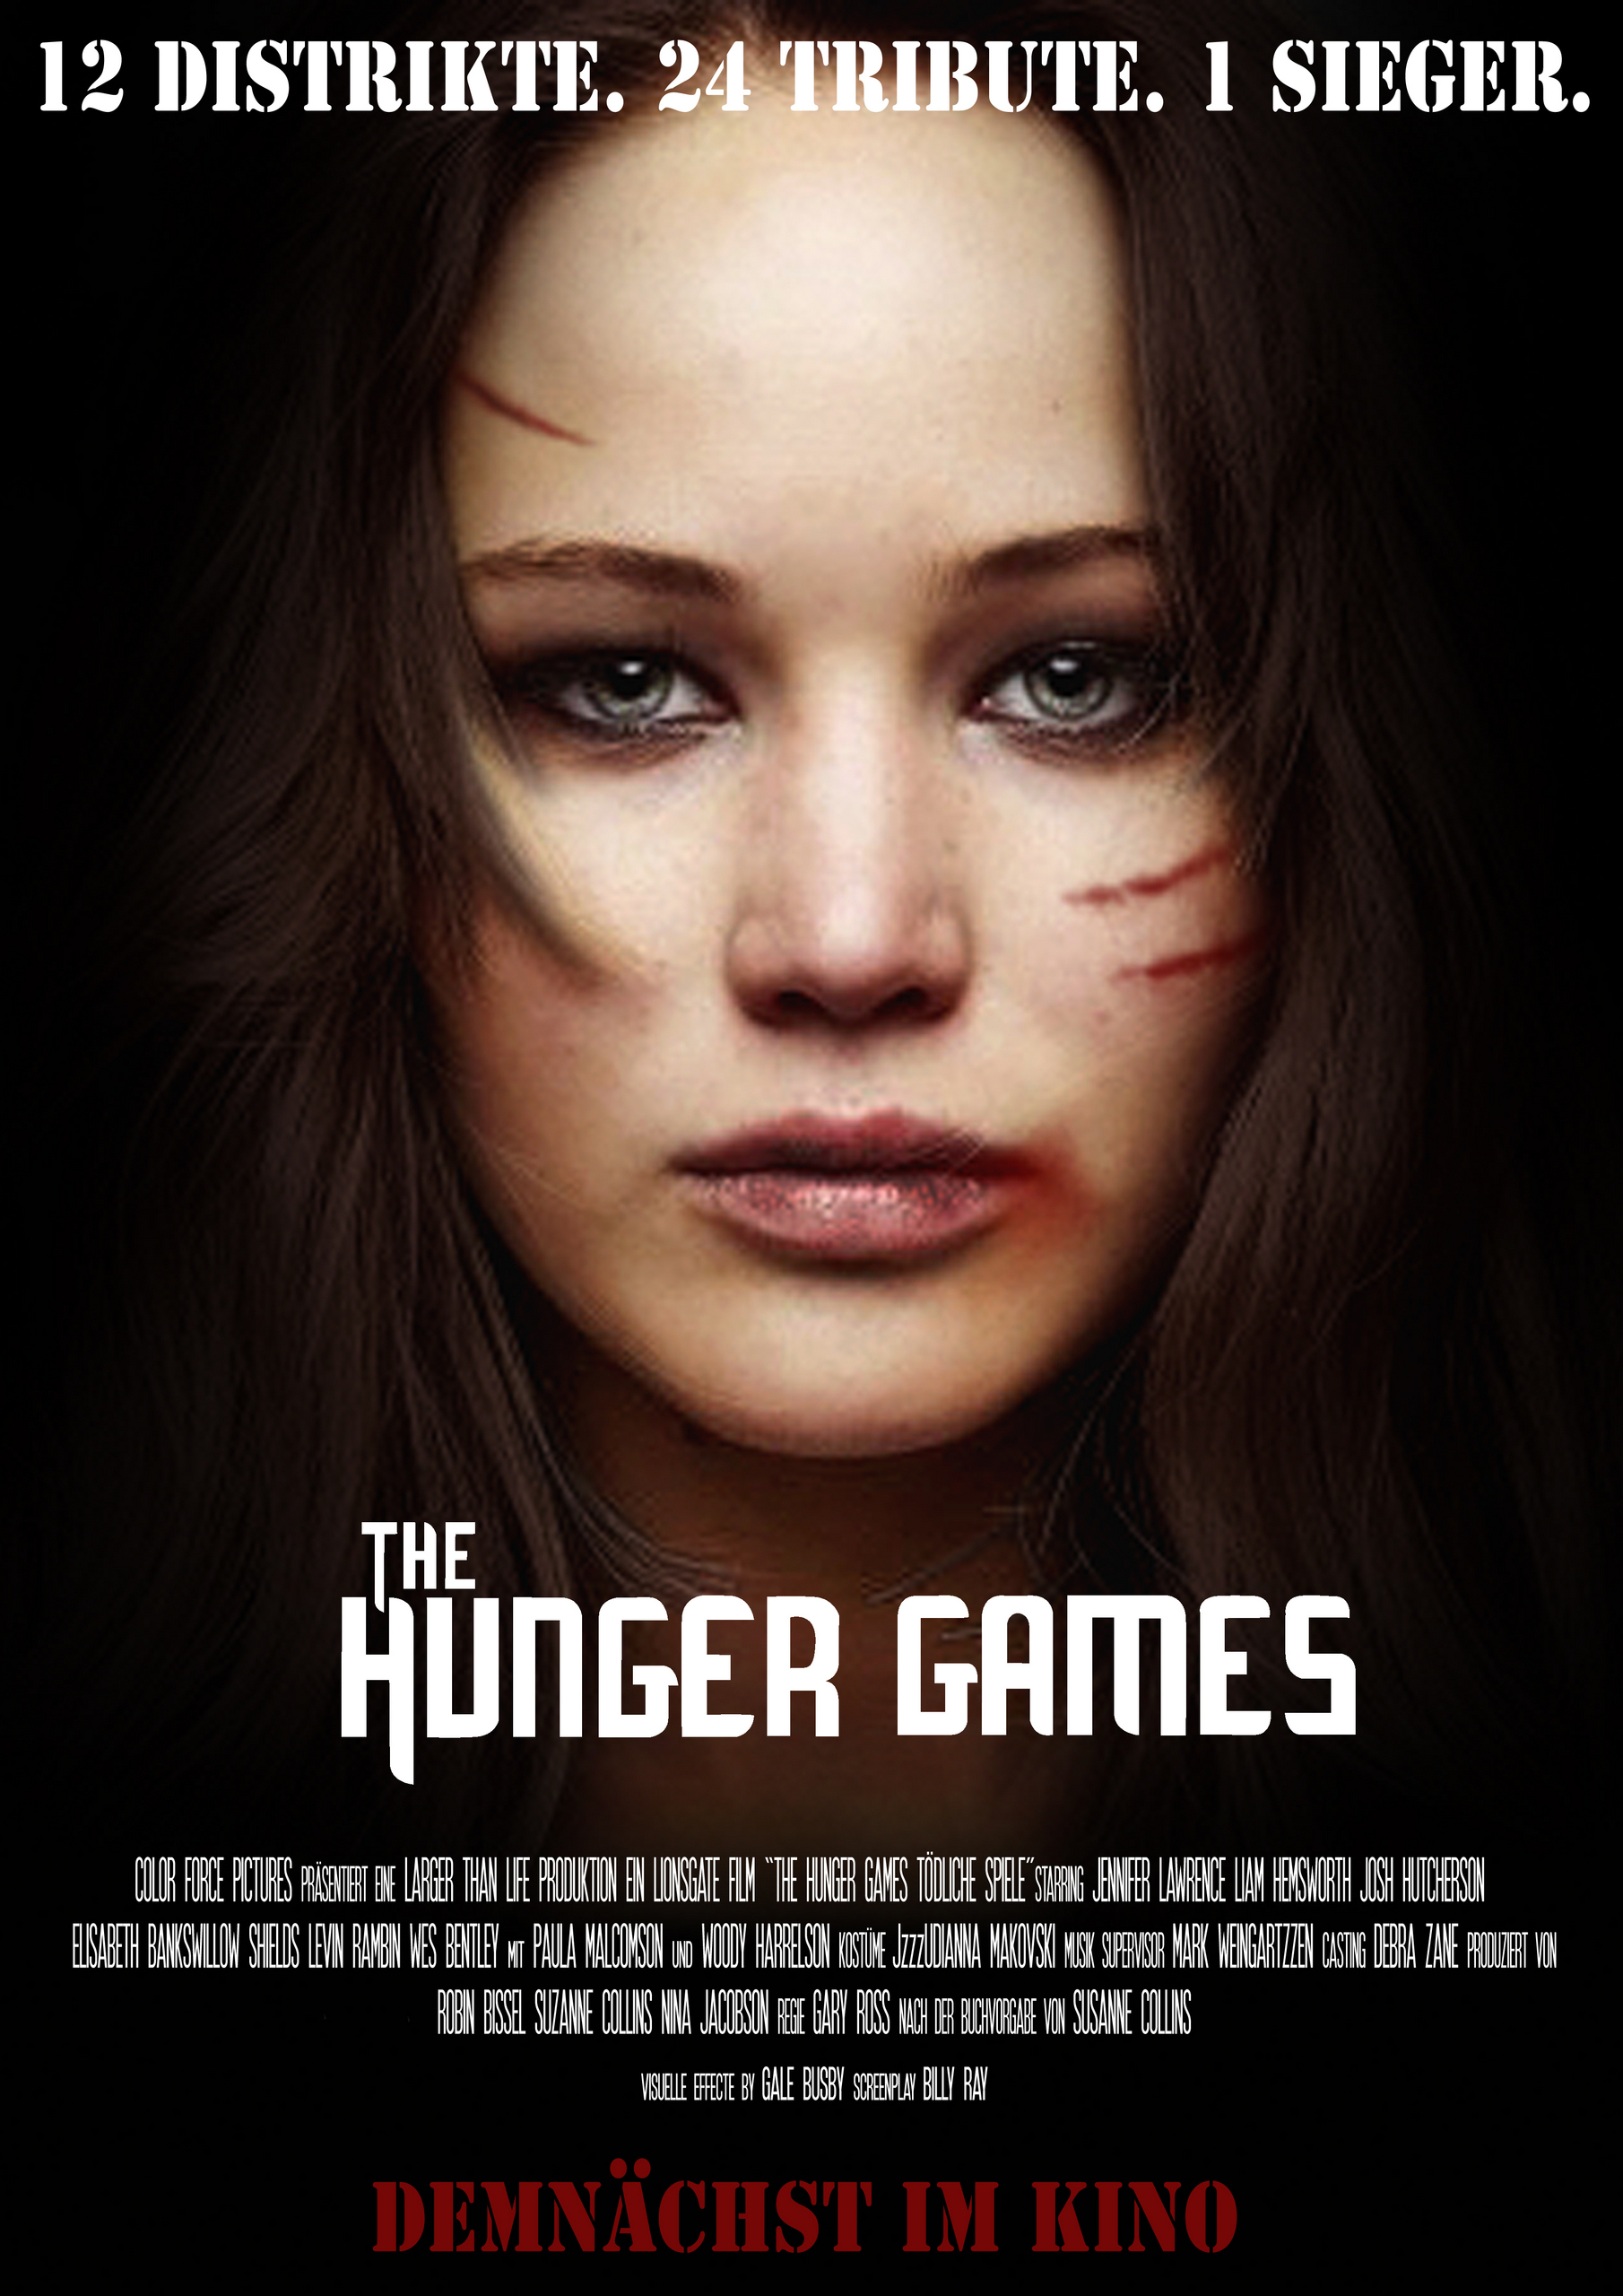 The Hunger Games movie